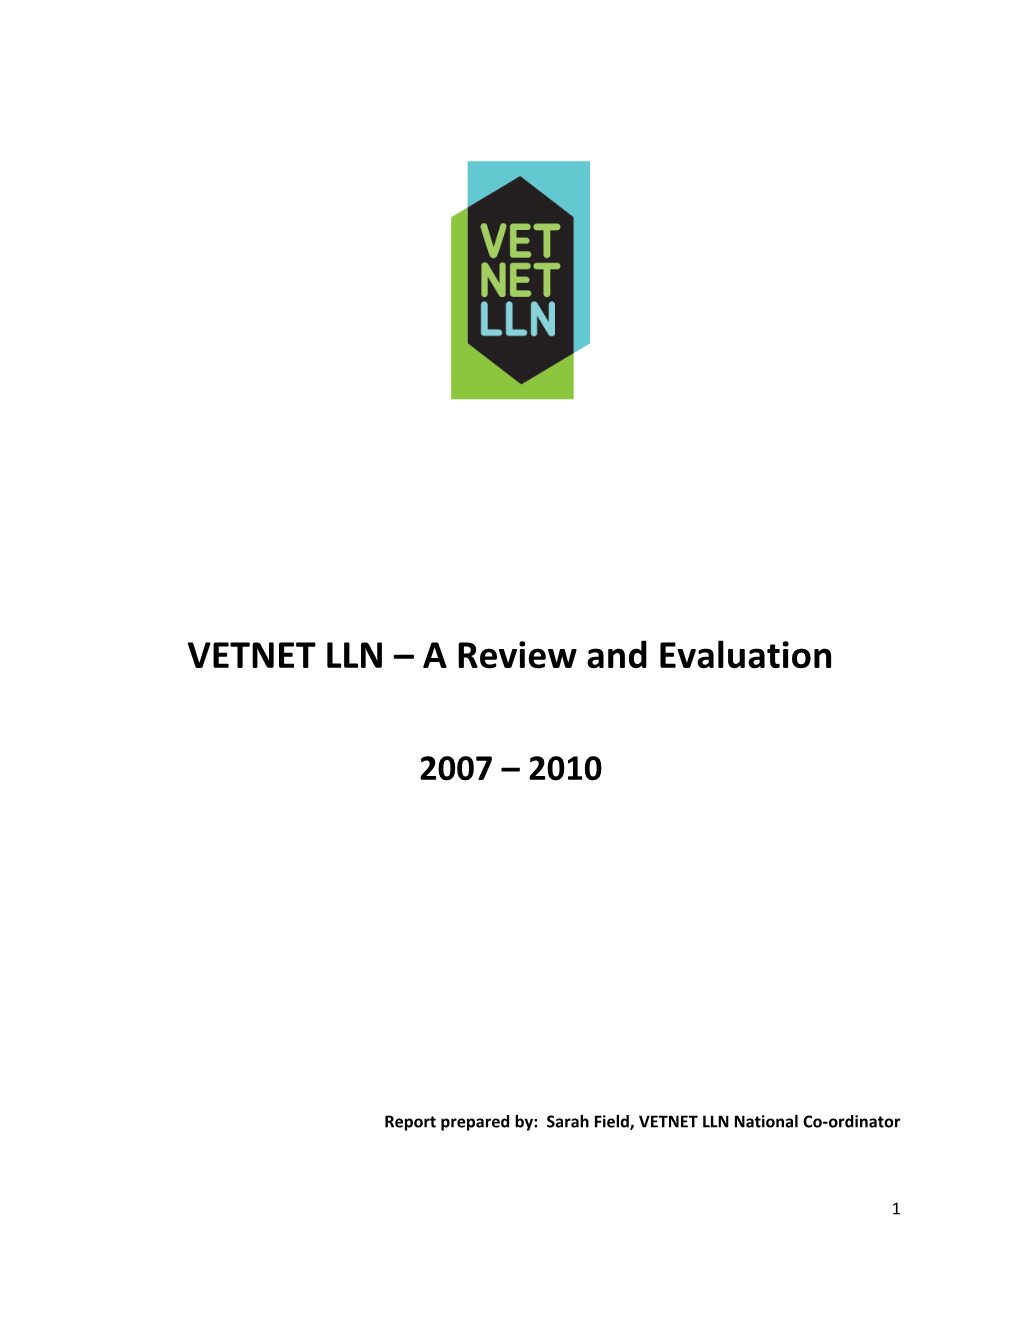 VETNET LLN a Review and Evaluation